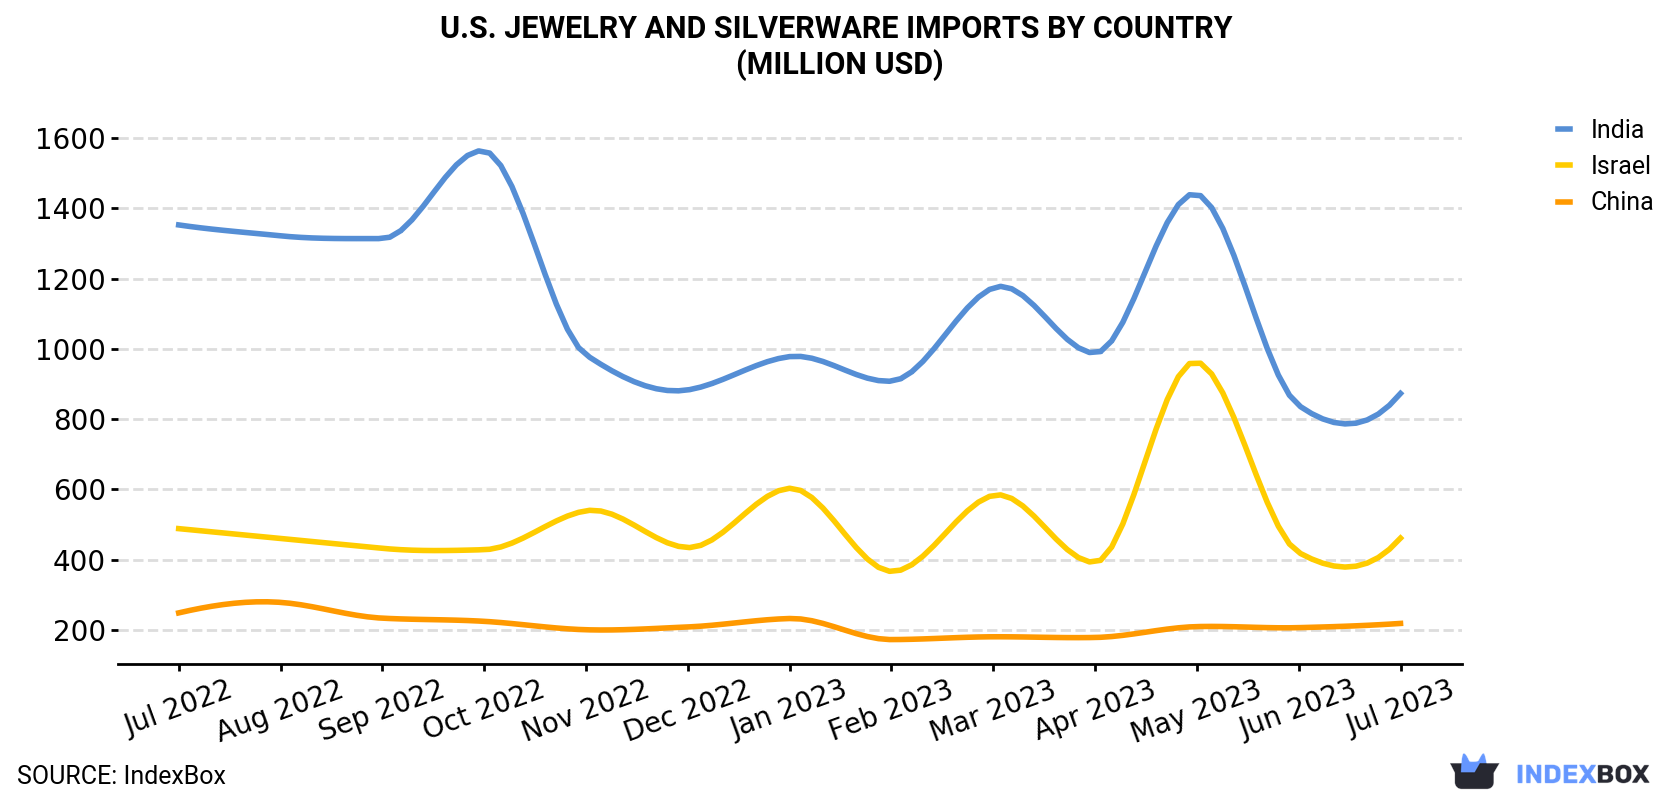 U.S. Jewelry and Silverware Imports By Country (Million USD)